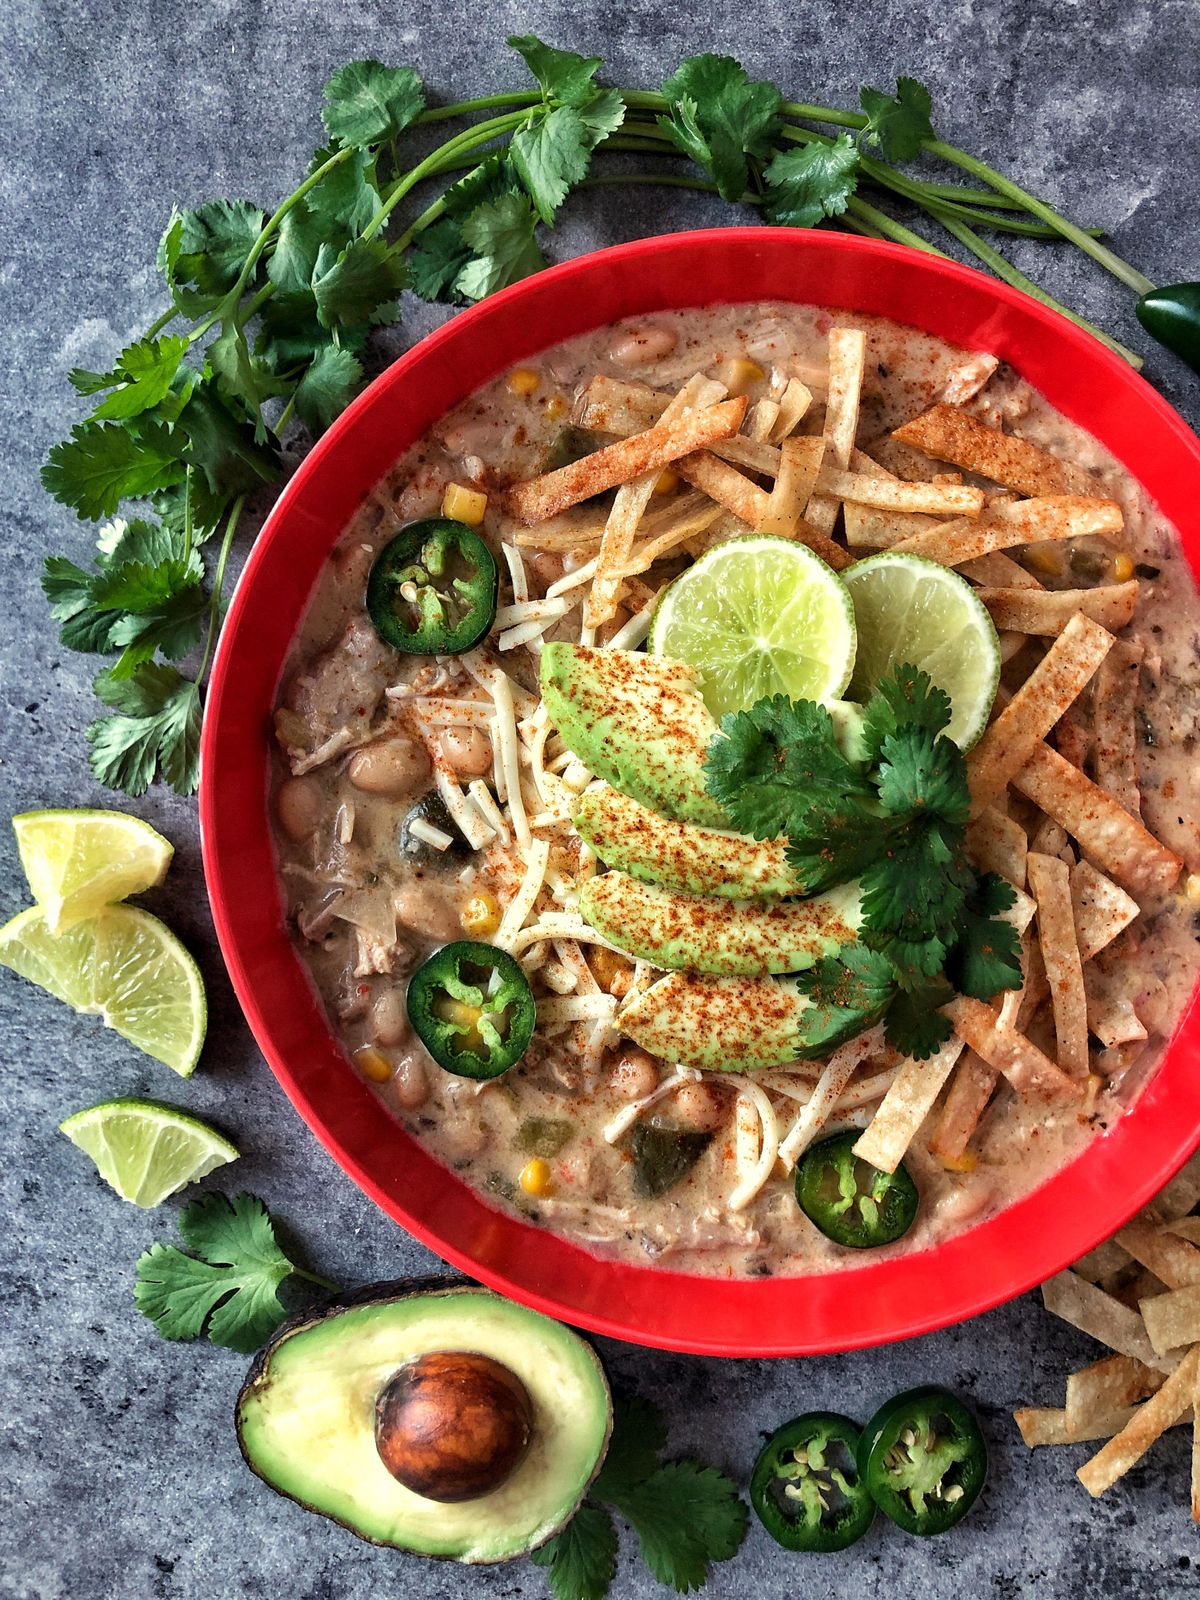 Dorothy Dean Presents Slow Cooker White Bean Chicken Chili Warms Up National Chili Day The Spokesman Review